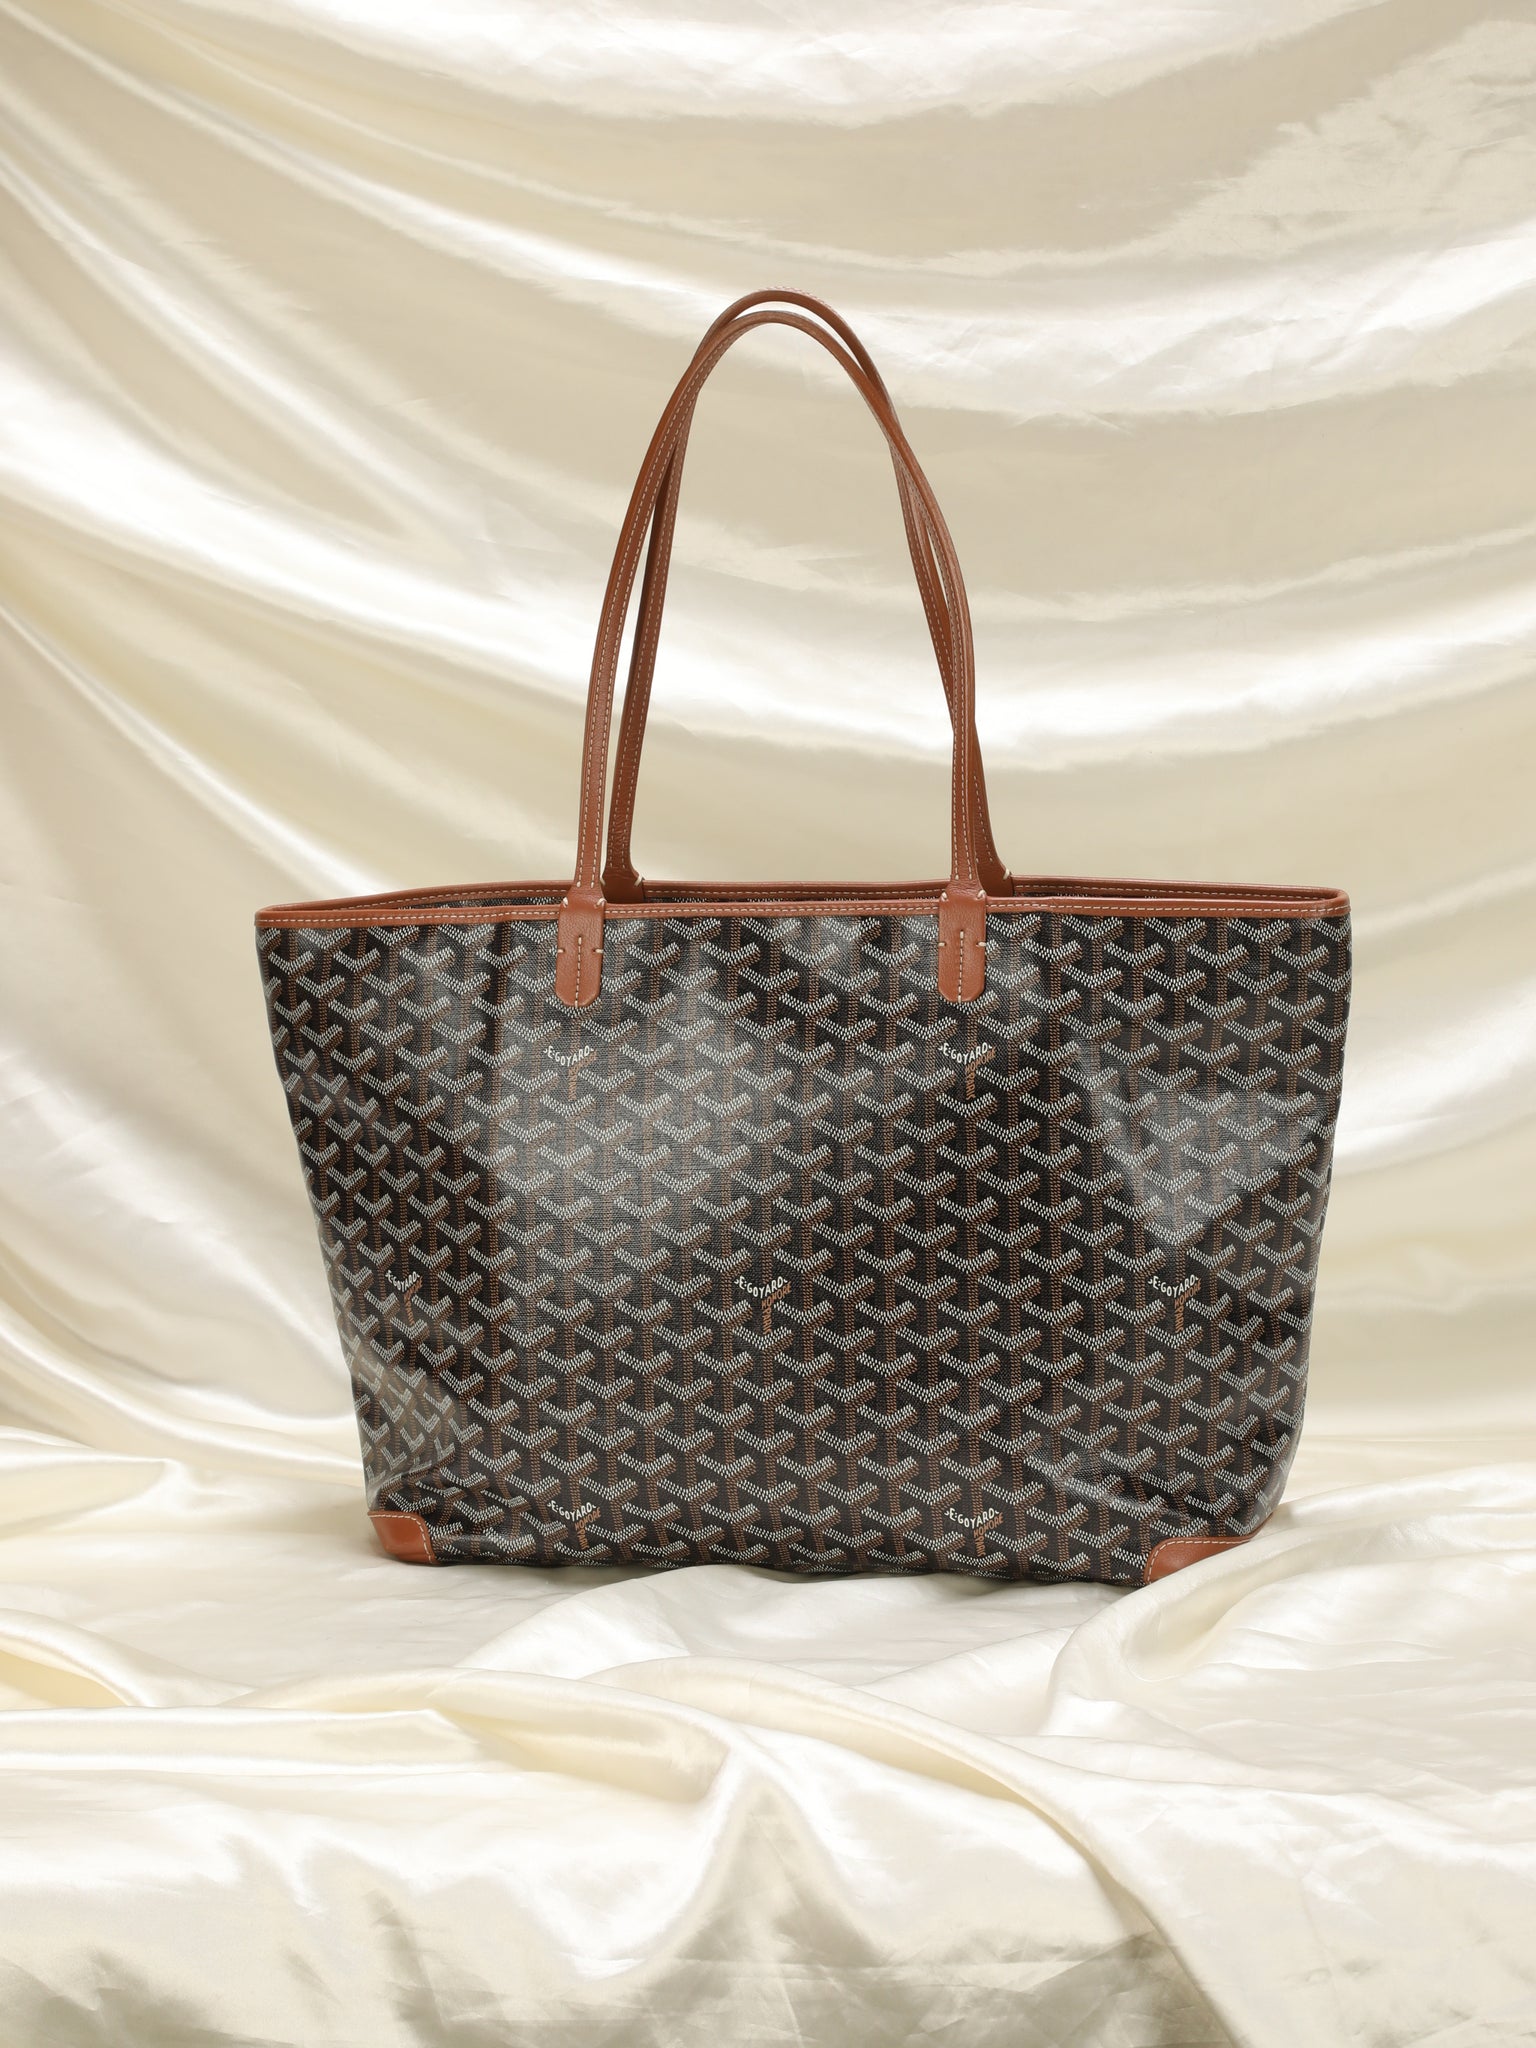 Does anyone own a goyard tote (st Louis or the artois)? Thoughts